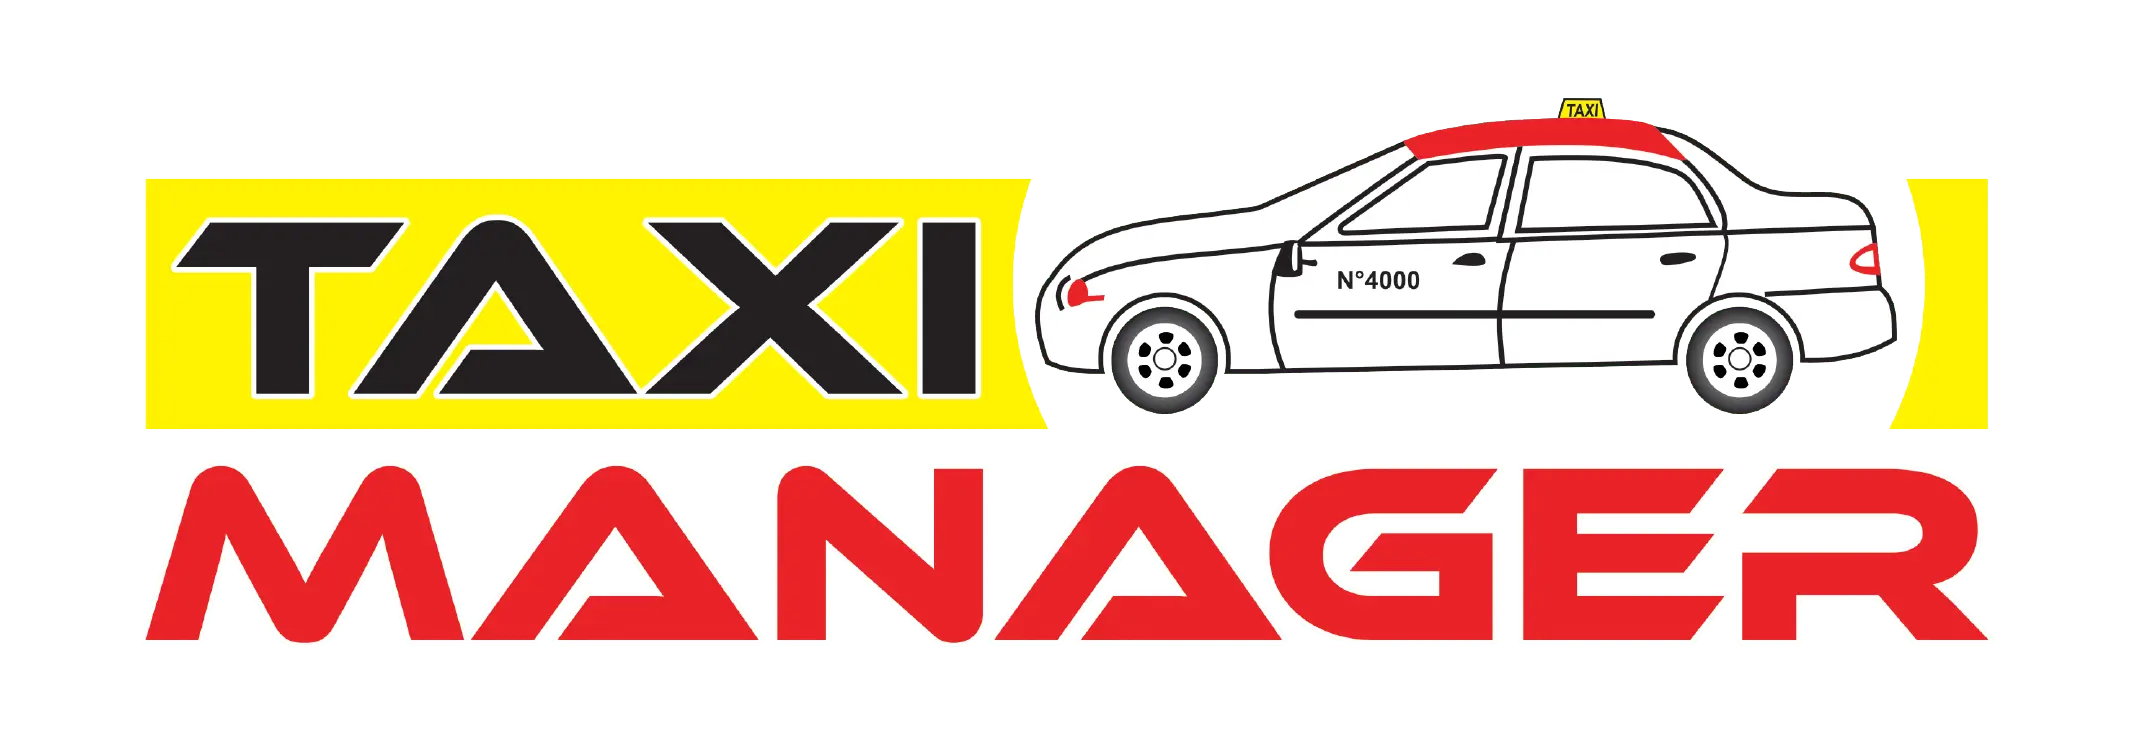 Taxi-Manager